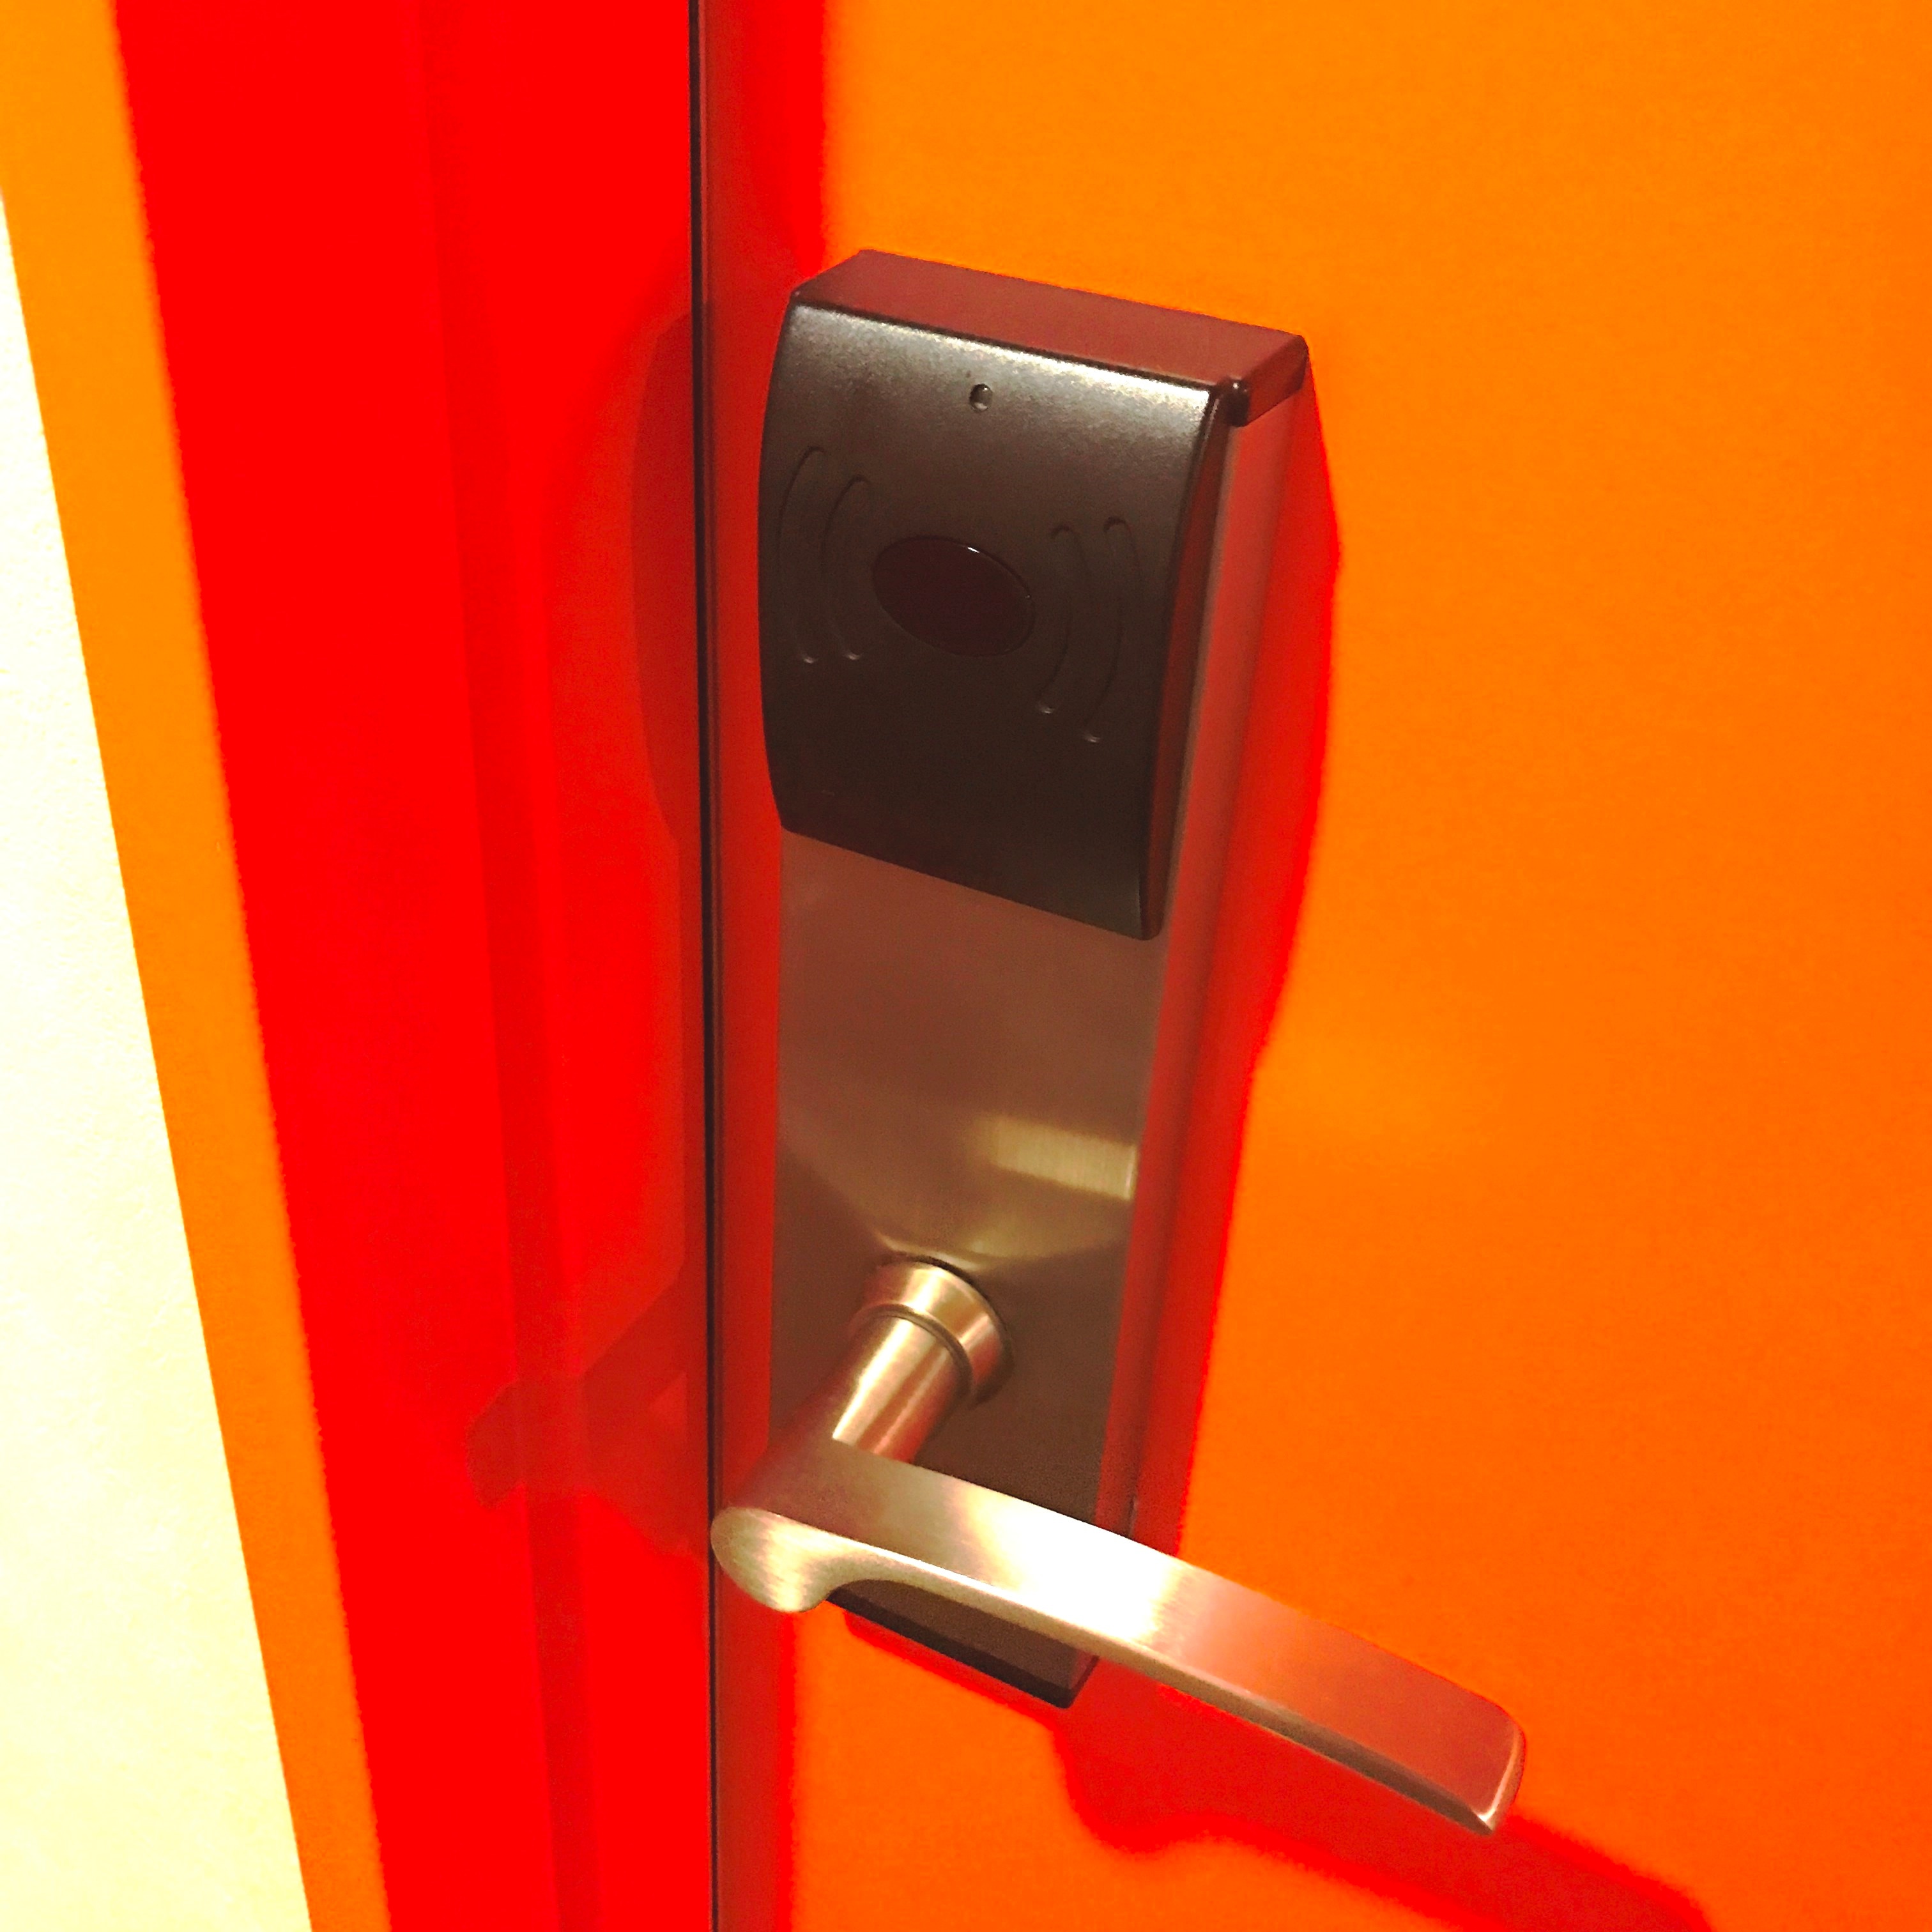 ◆ Guest room door ◆ The lock can be unlocked by holding the guest room card key over it. It is an auto lock.